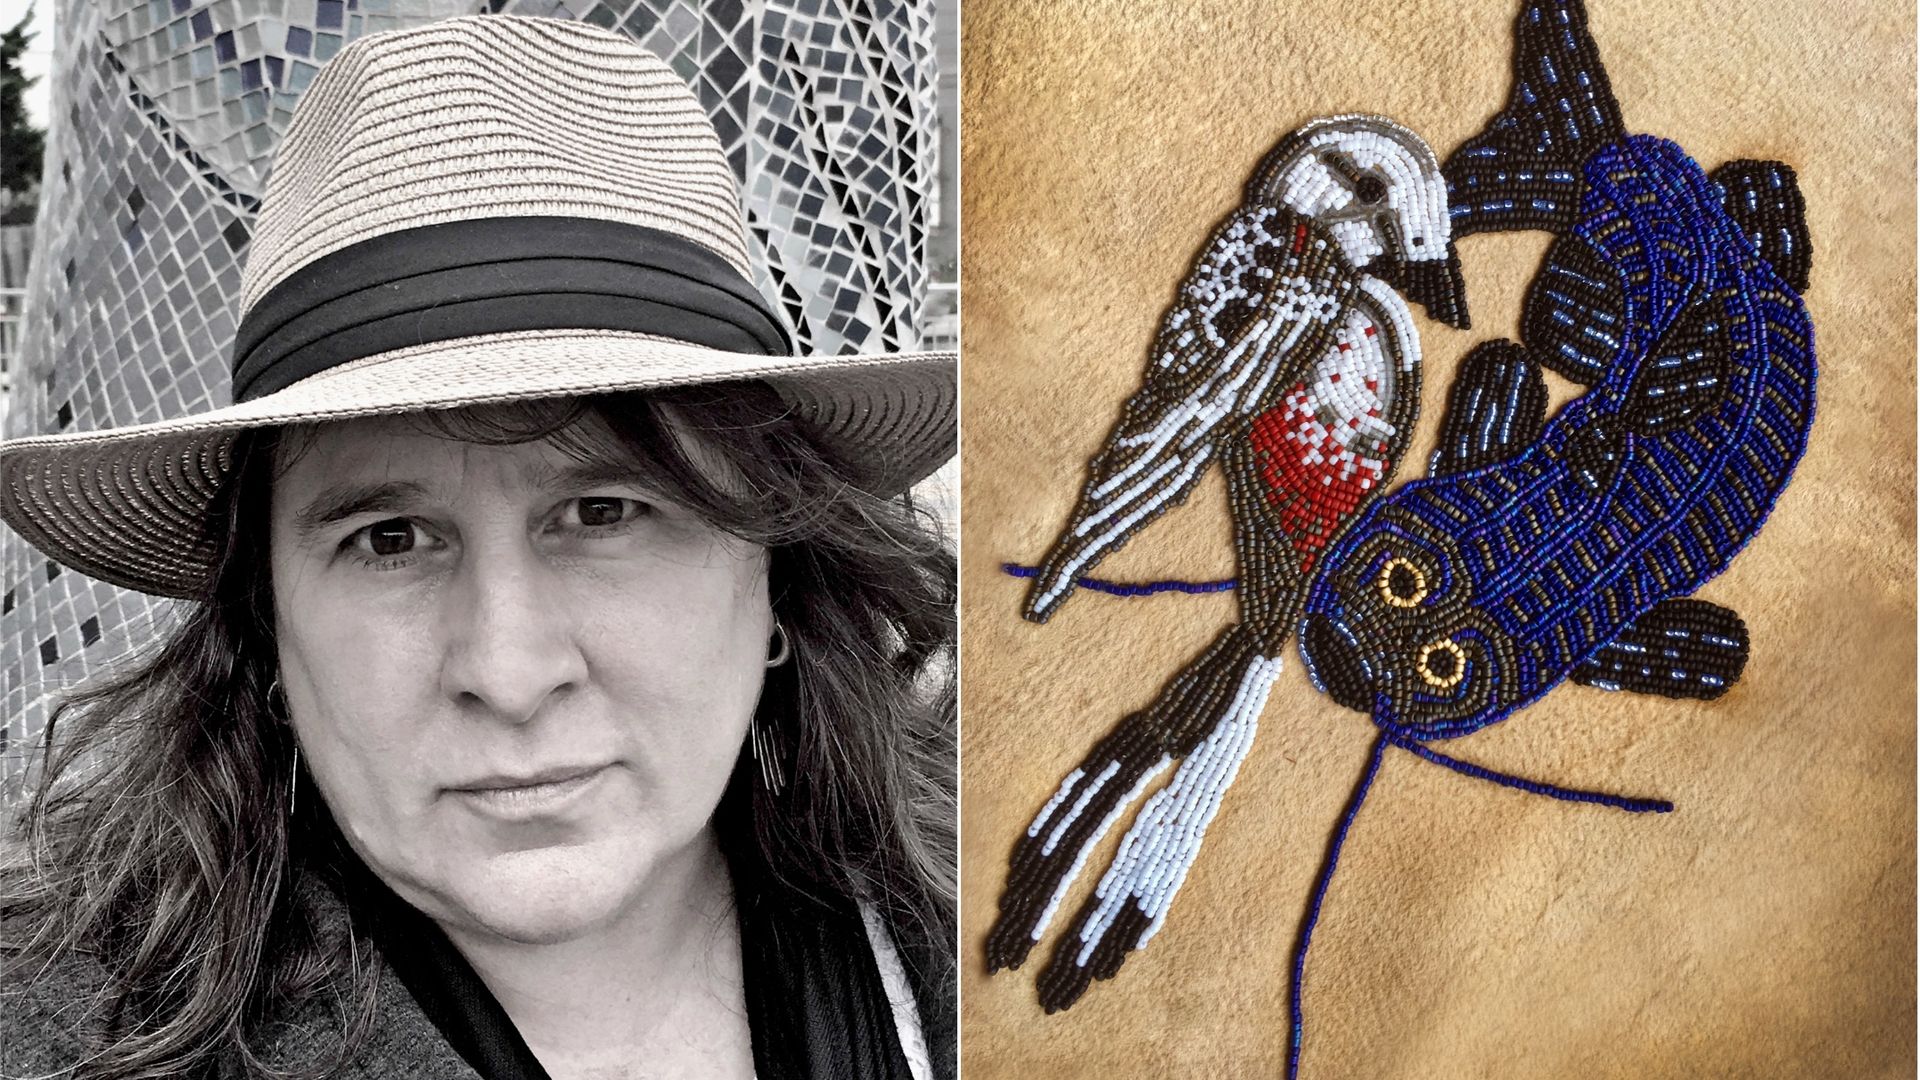 Photo of Kim Shuck on the left and a woven art piece on the right (showing a bird and a fish)